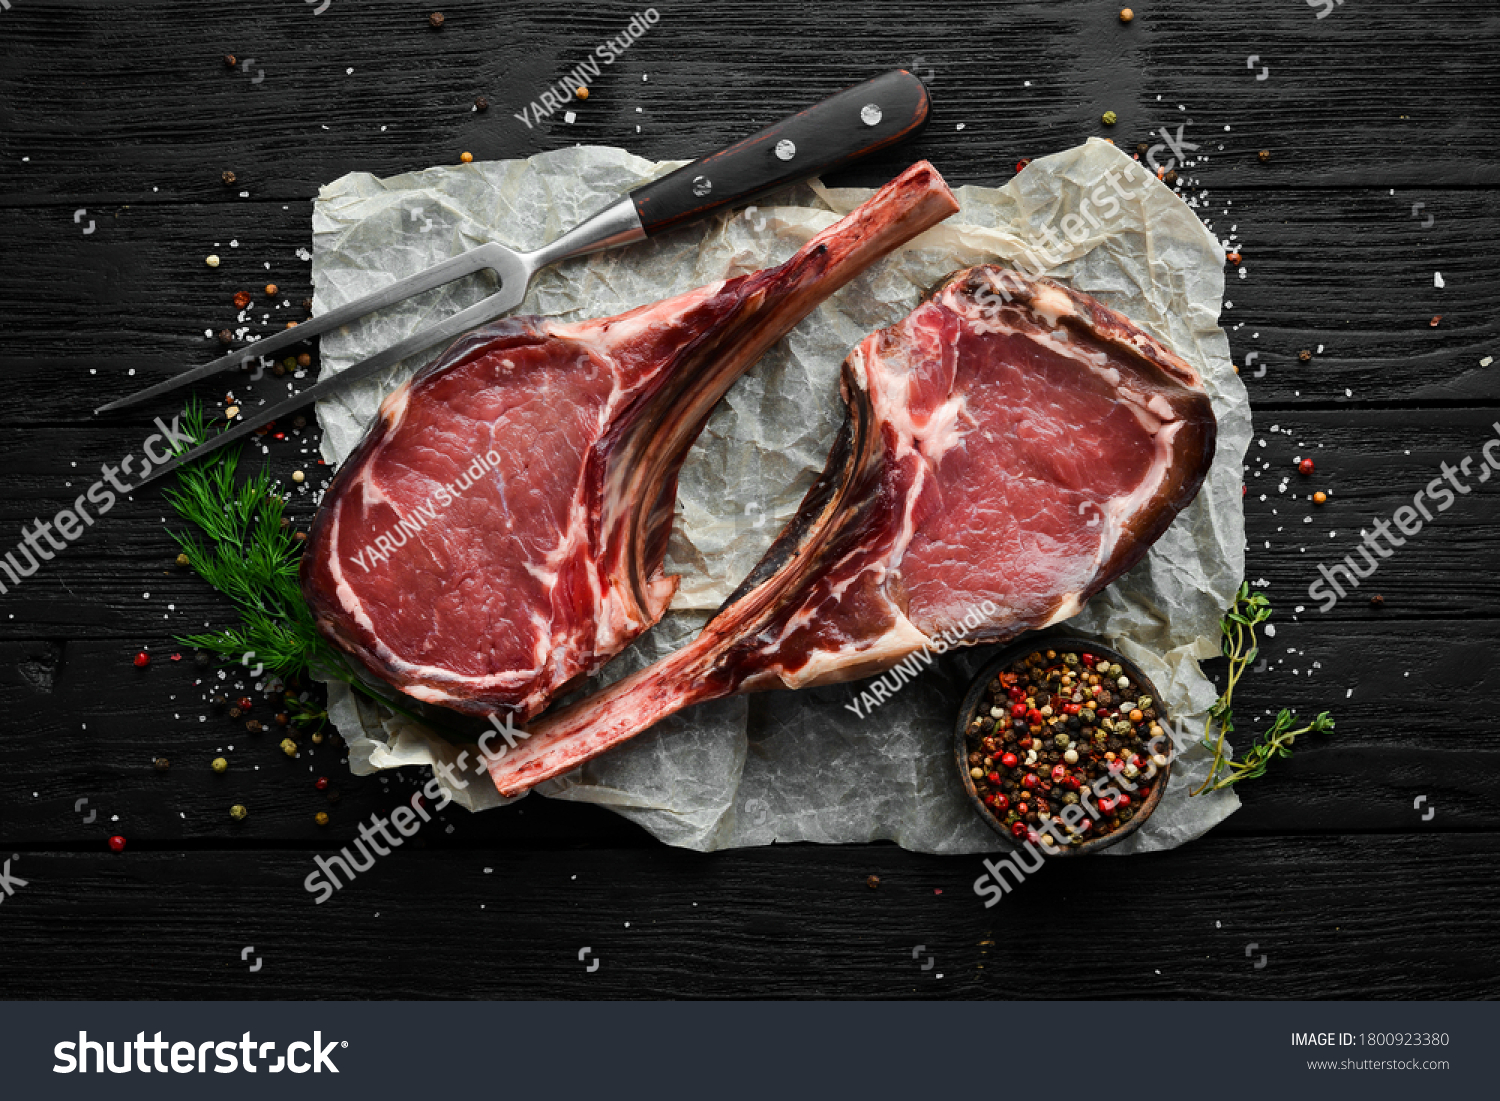 Dry aged raw tomahawk beef steak with spices. On a black wooden background. Top view. Free copy space. #1800923380